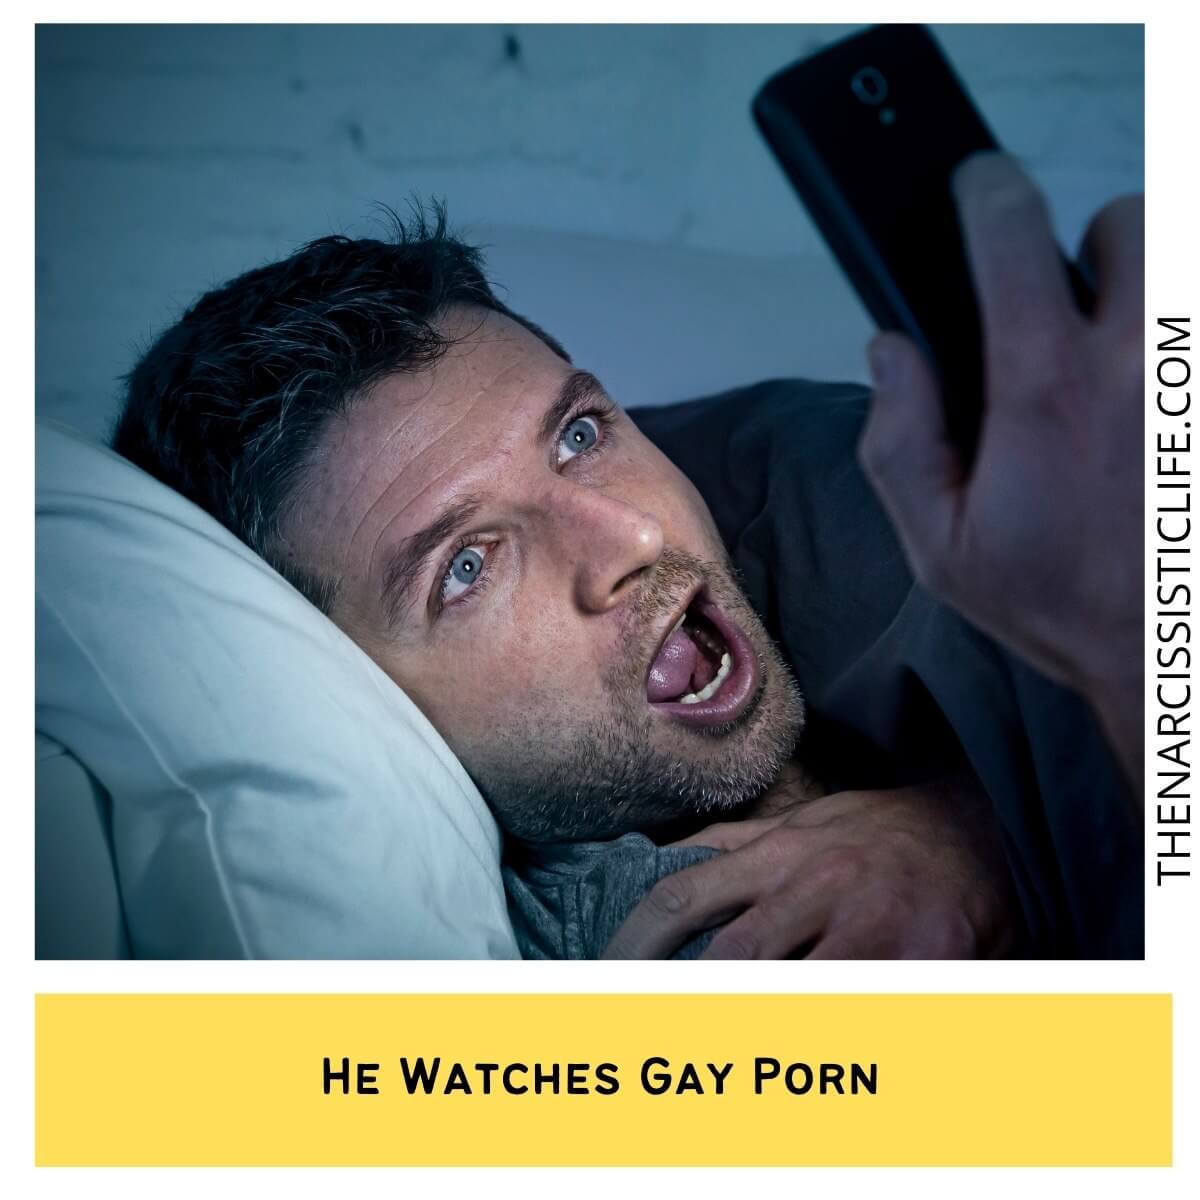 Boyfriend Watches Gay Porn - 16 Signs A Guy Is Pretending To Be Straight - The Narcissistic Life